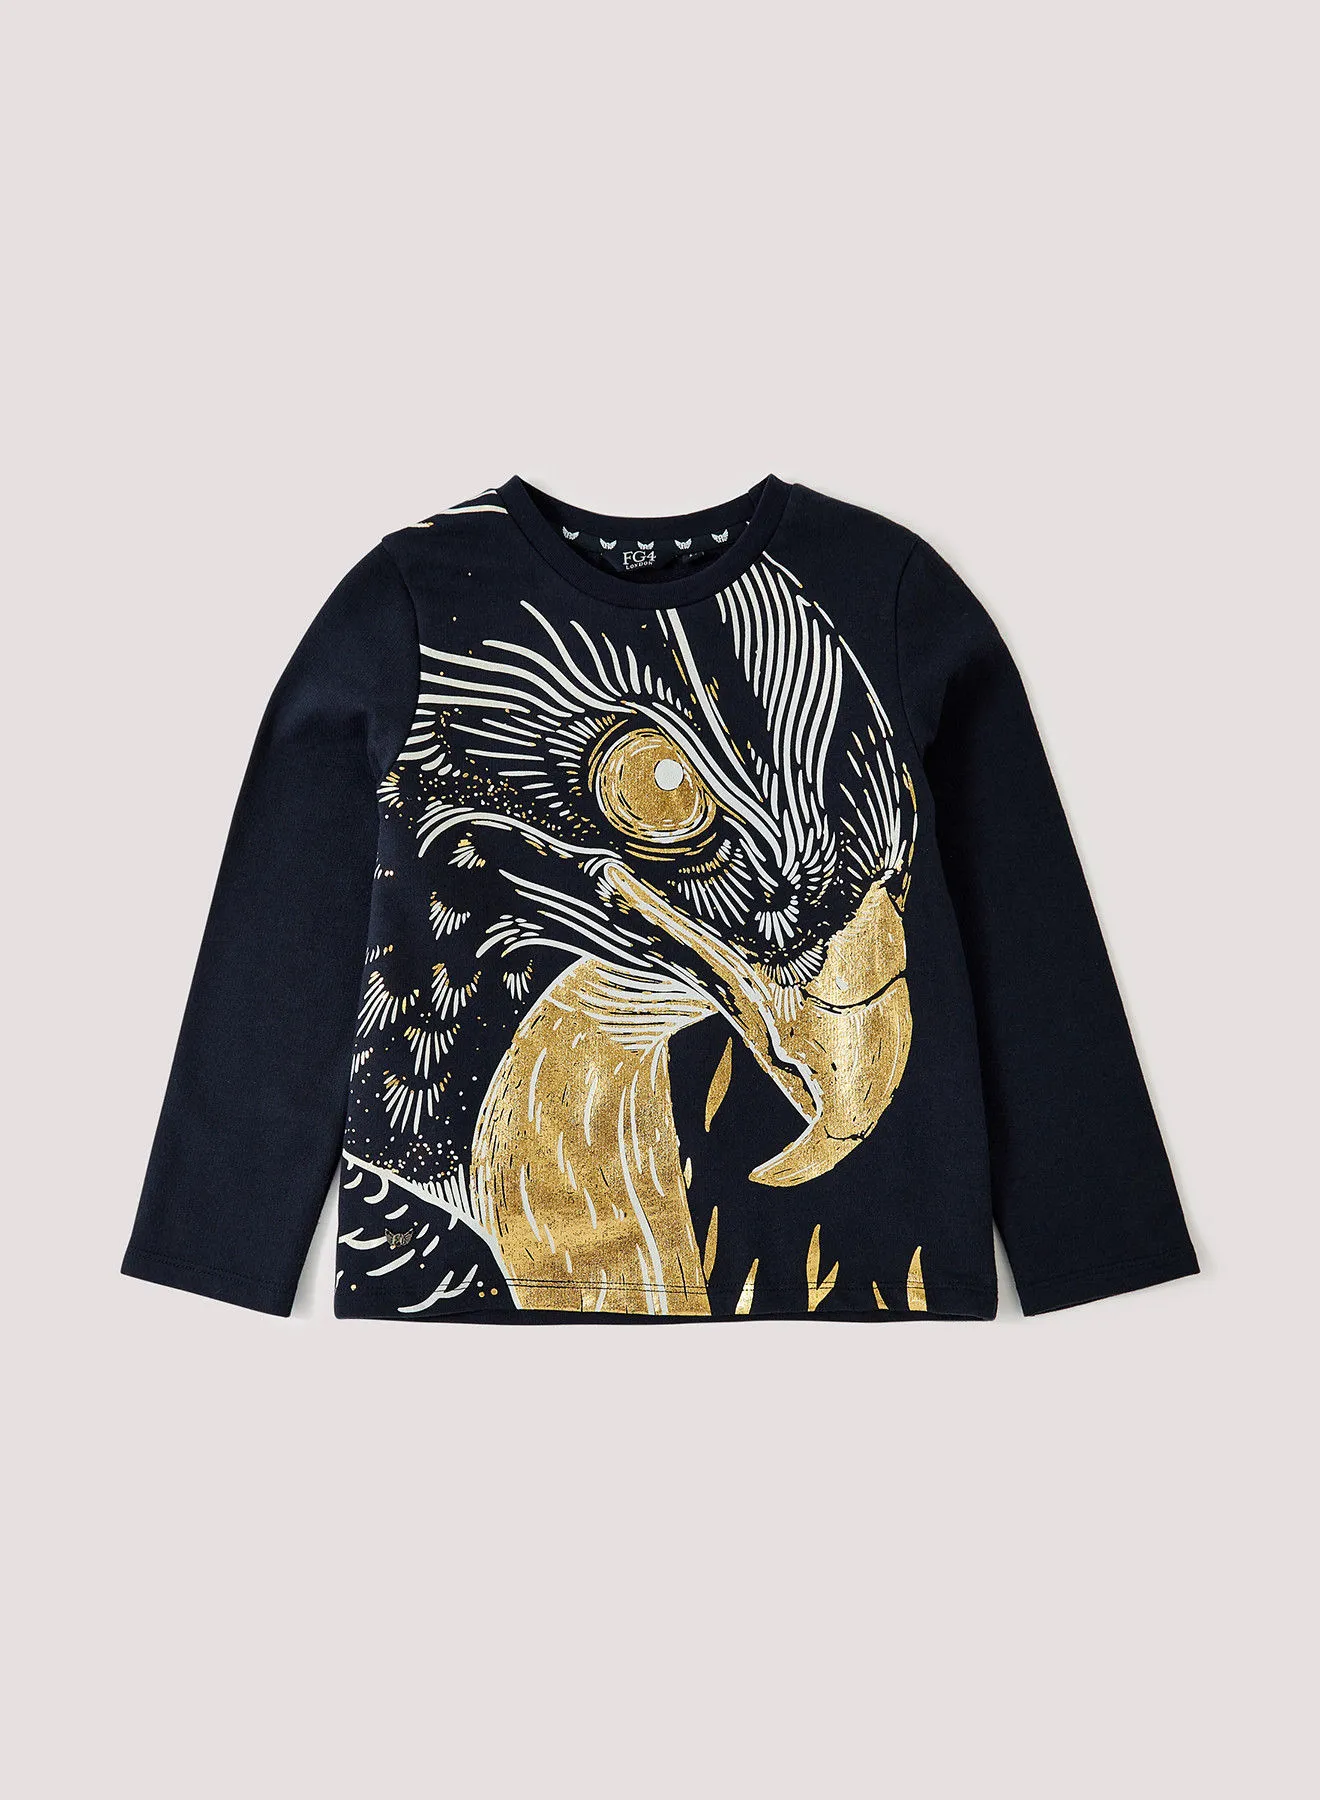 FG4 Kids FG4 Enzo LS Tee with oversized eagle graphic using puff print and gold foil